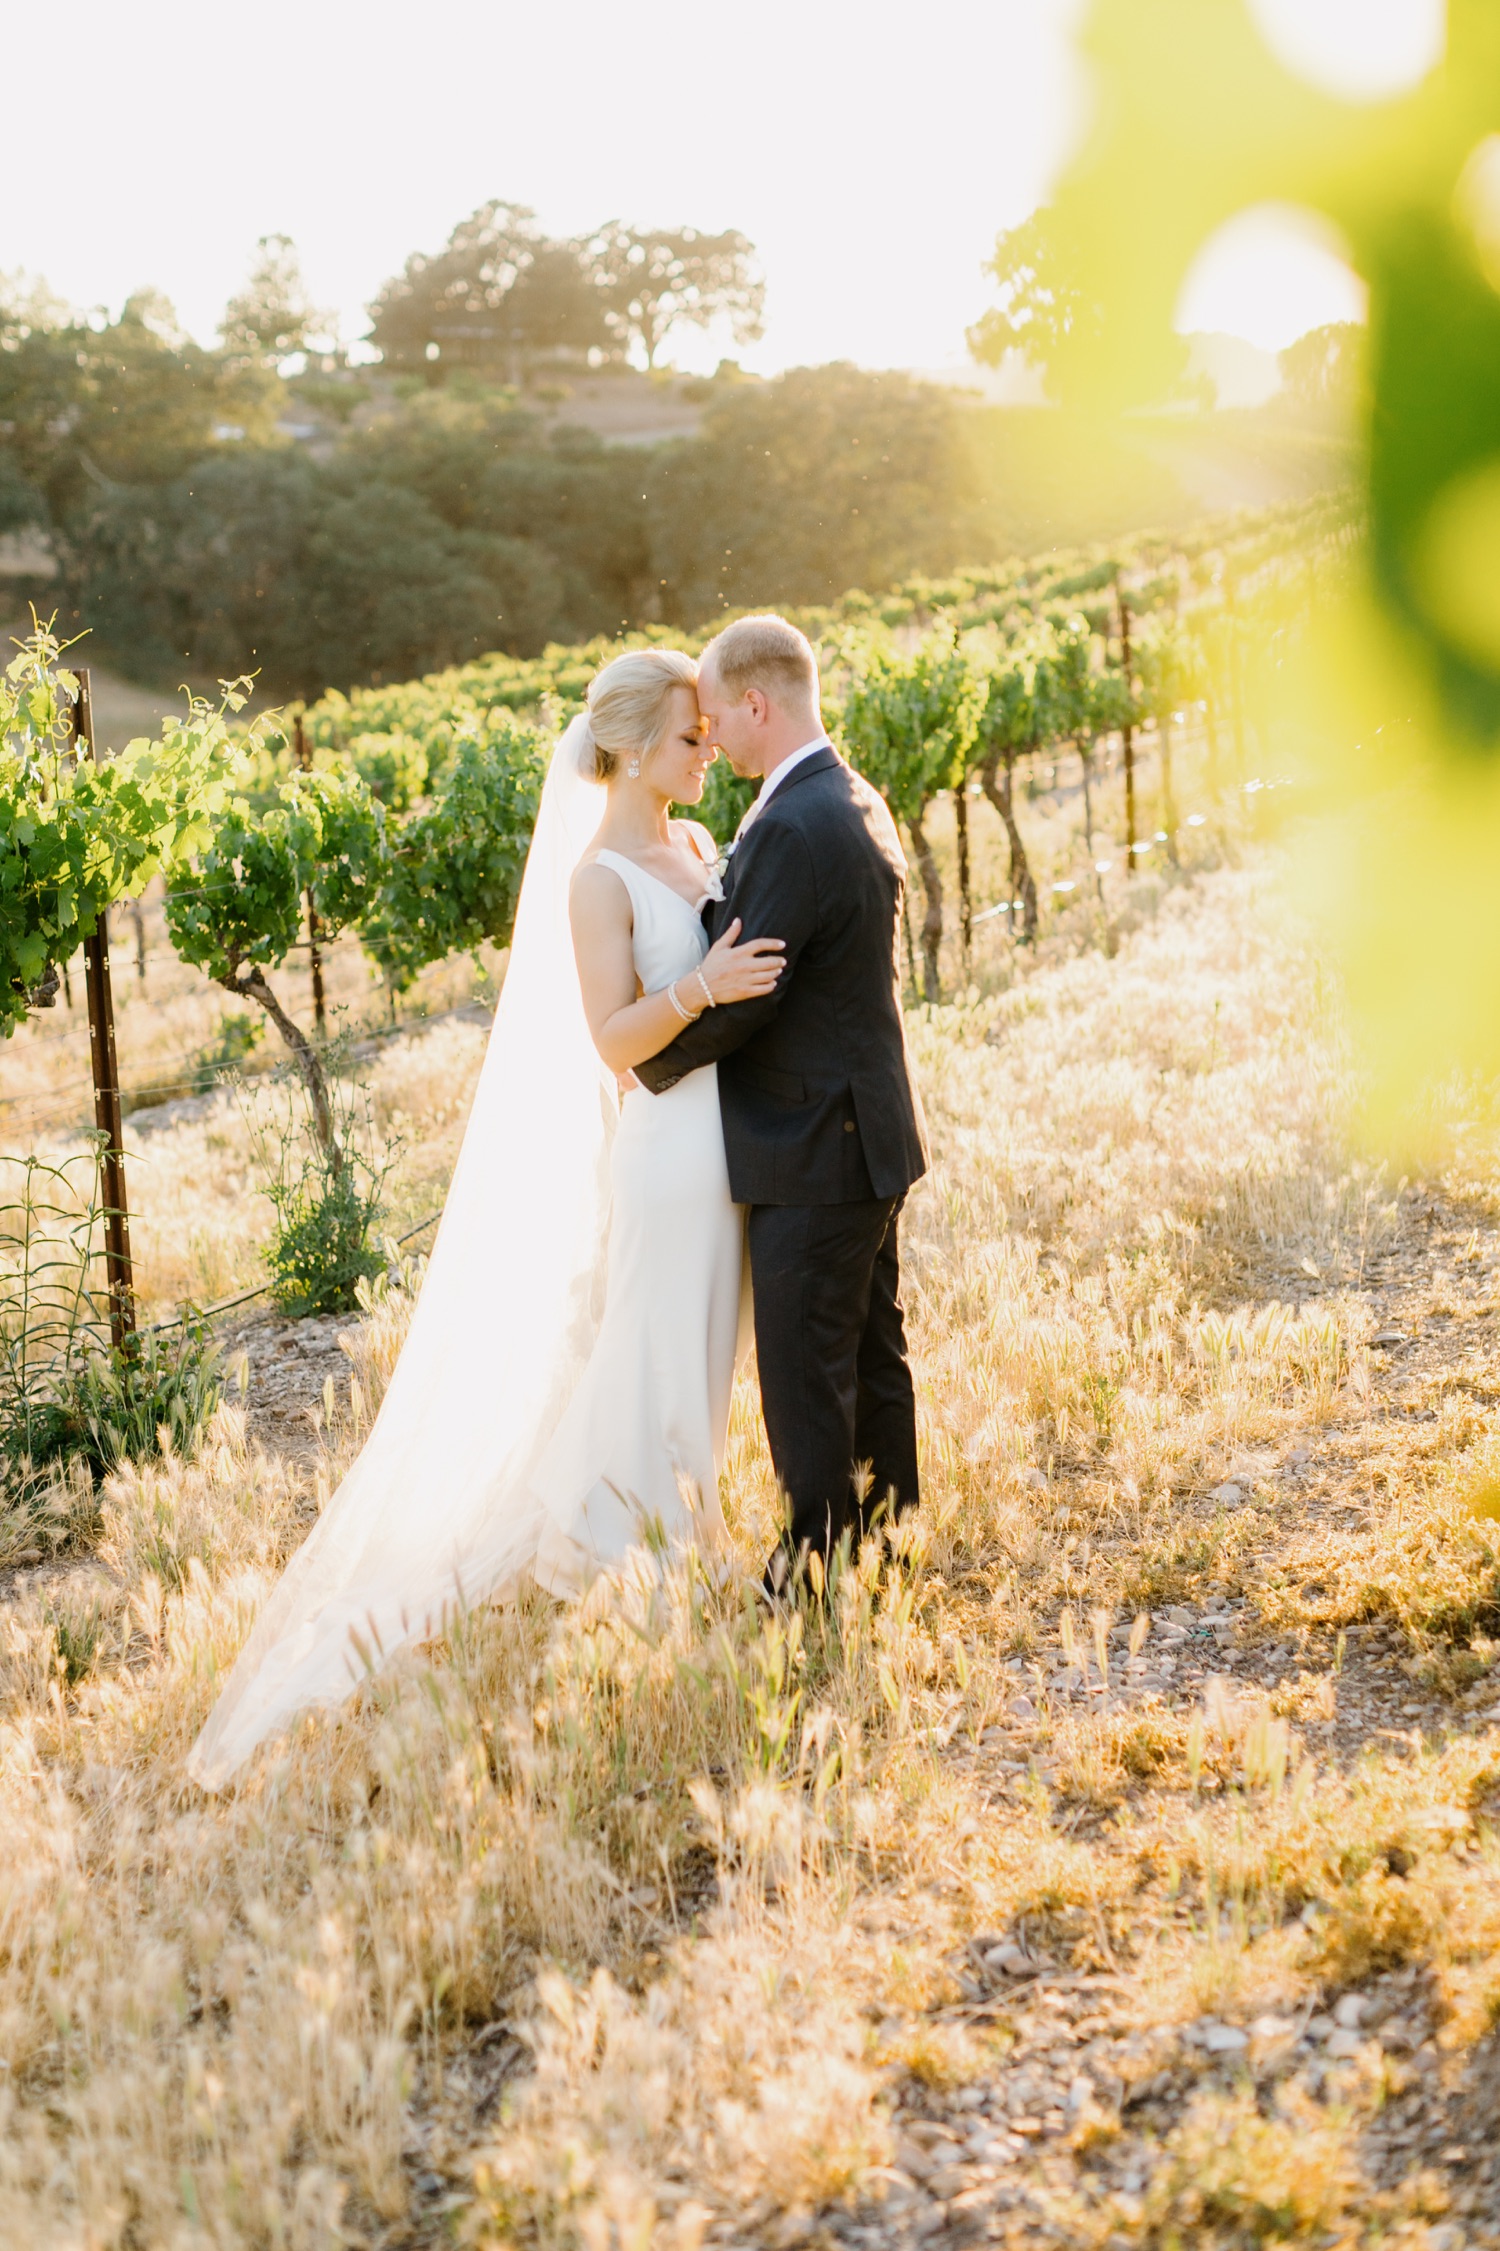 Couple embracing during sunset photos with tayler enerle at Terra Mia wedding